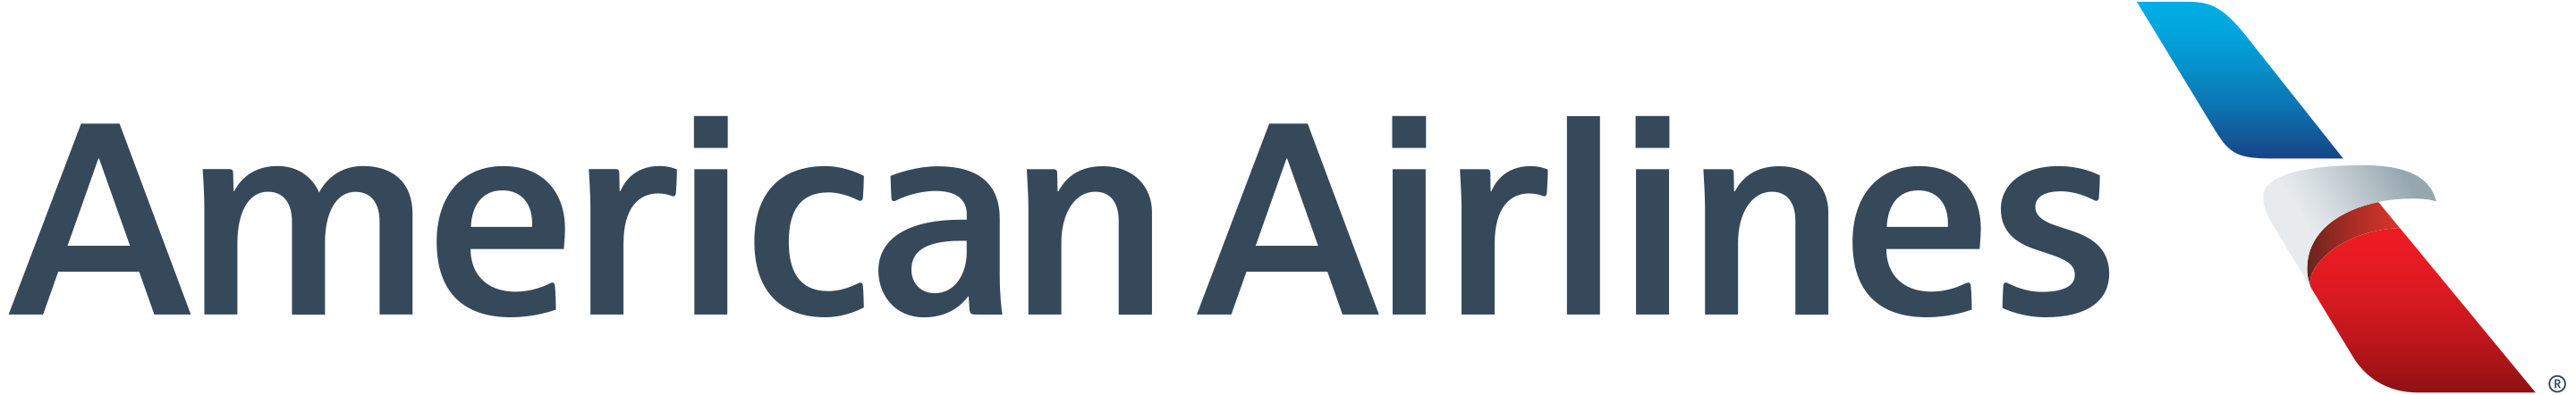 American Airlines: Logo